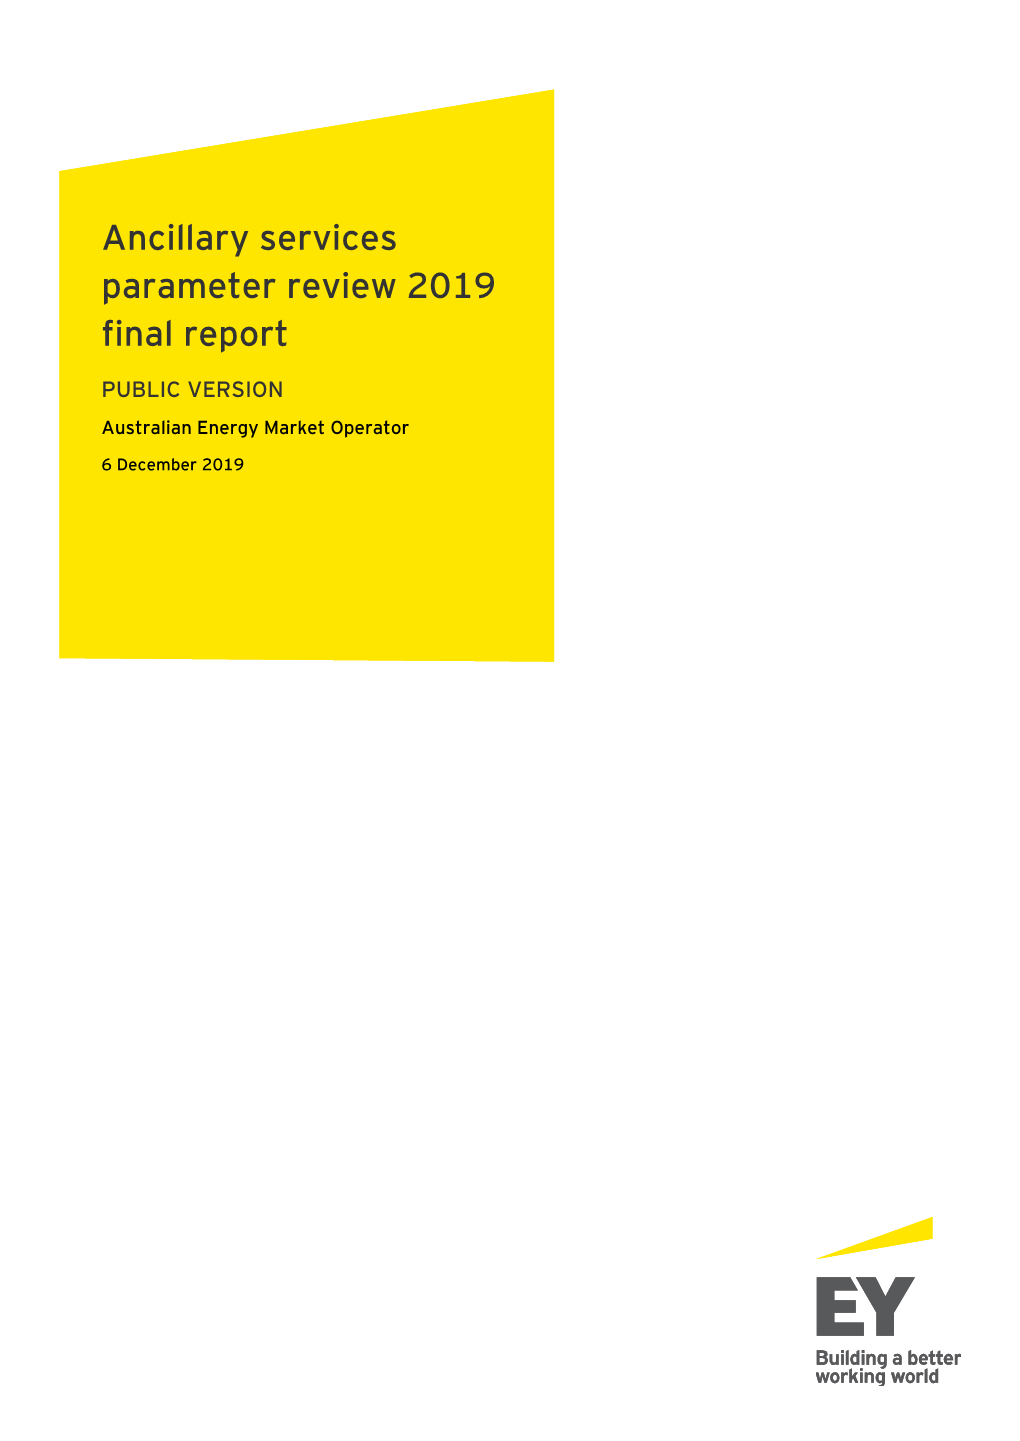 Ancillary Services Parameter Review 2019 Final Report